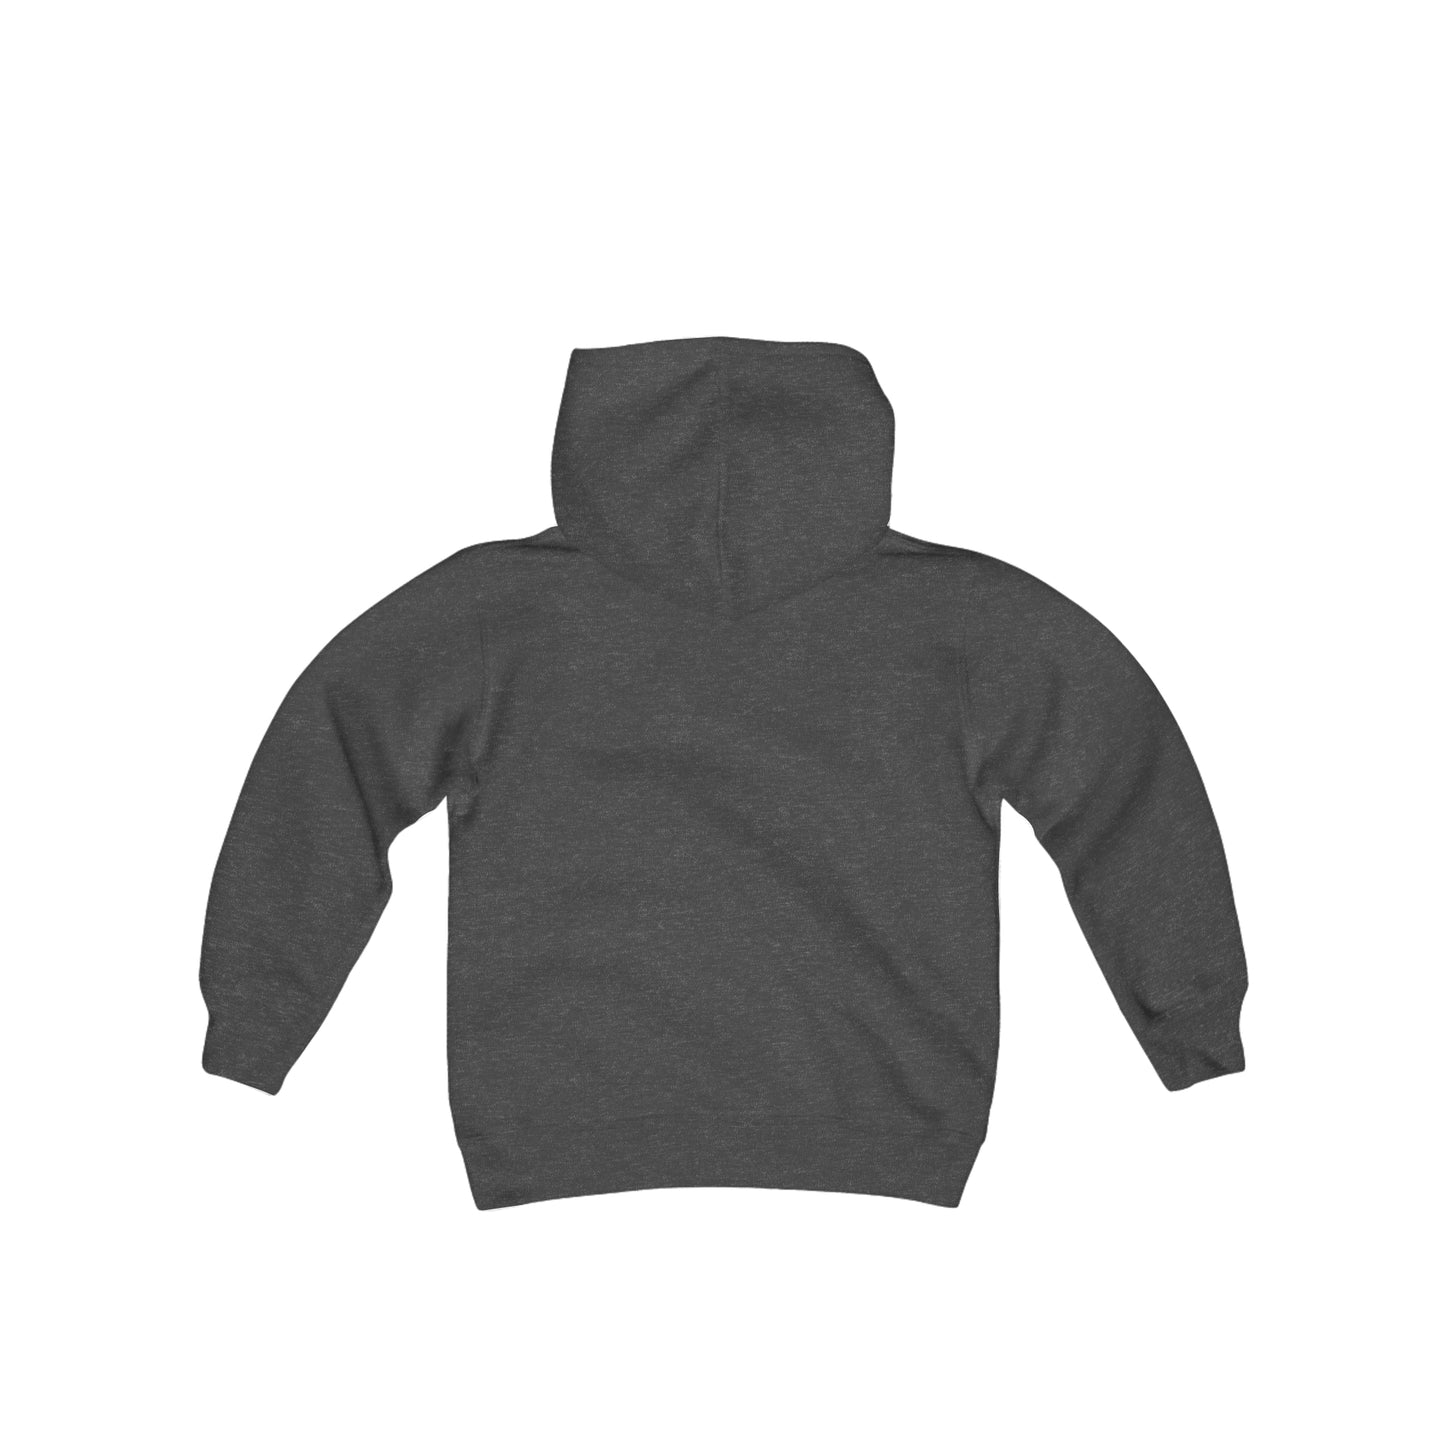 Classic Real Purpose Apparel Youth Heavy Blend Hooded Sweatshirt